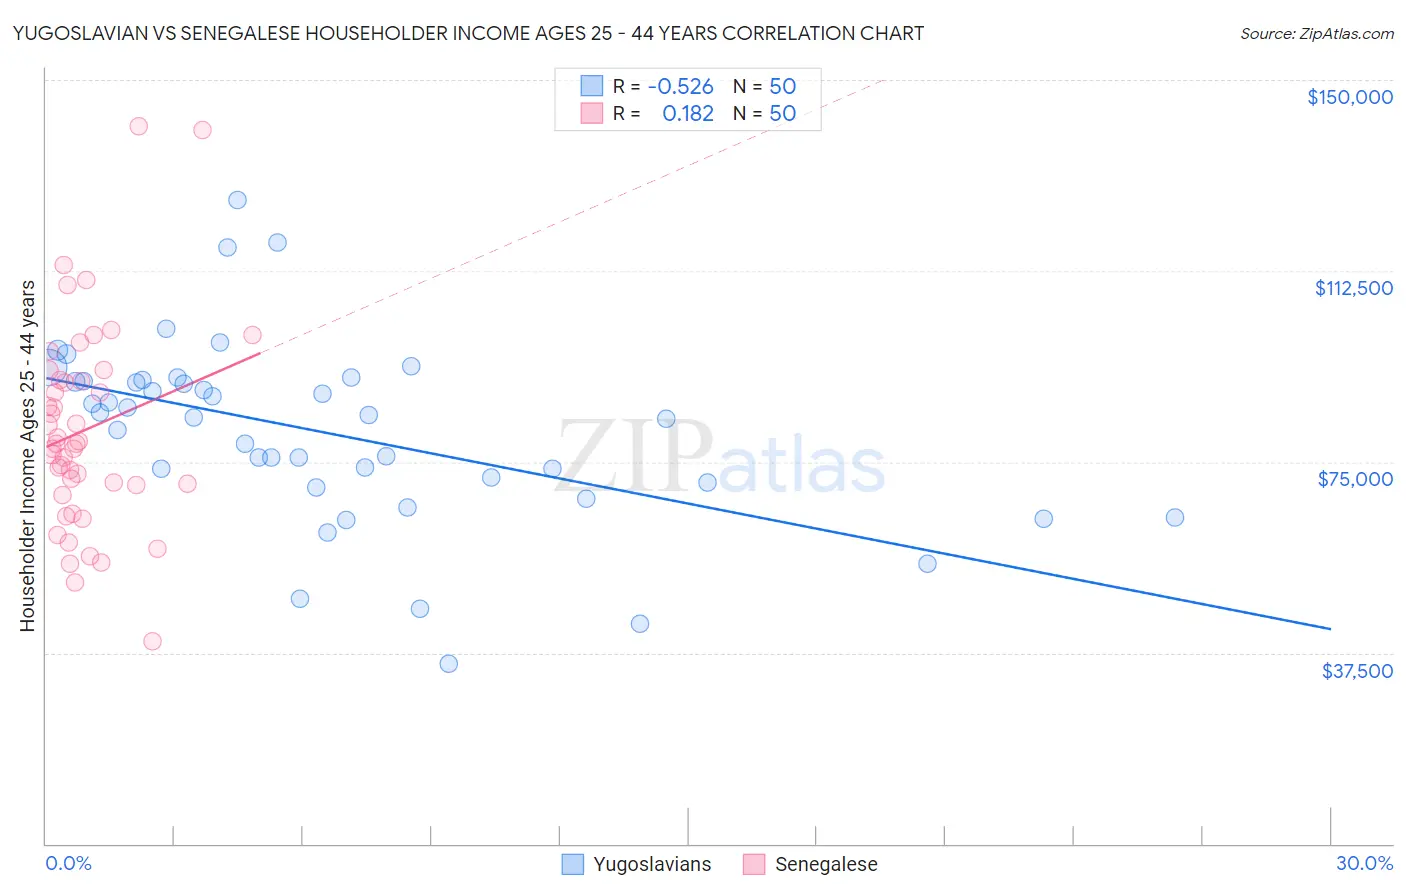 Yugoslavian vs Senegalese Householder Income Ages 25 - 44 years